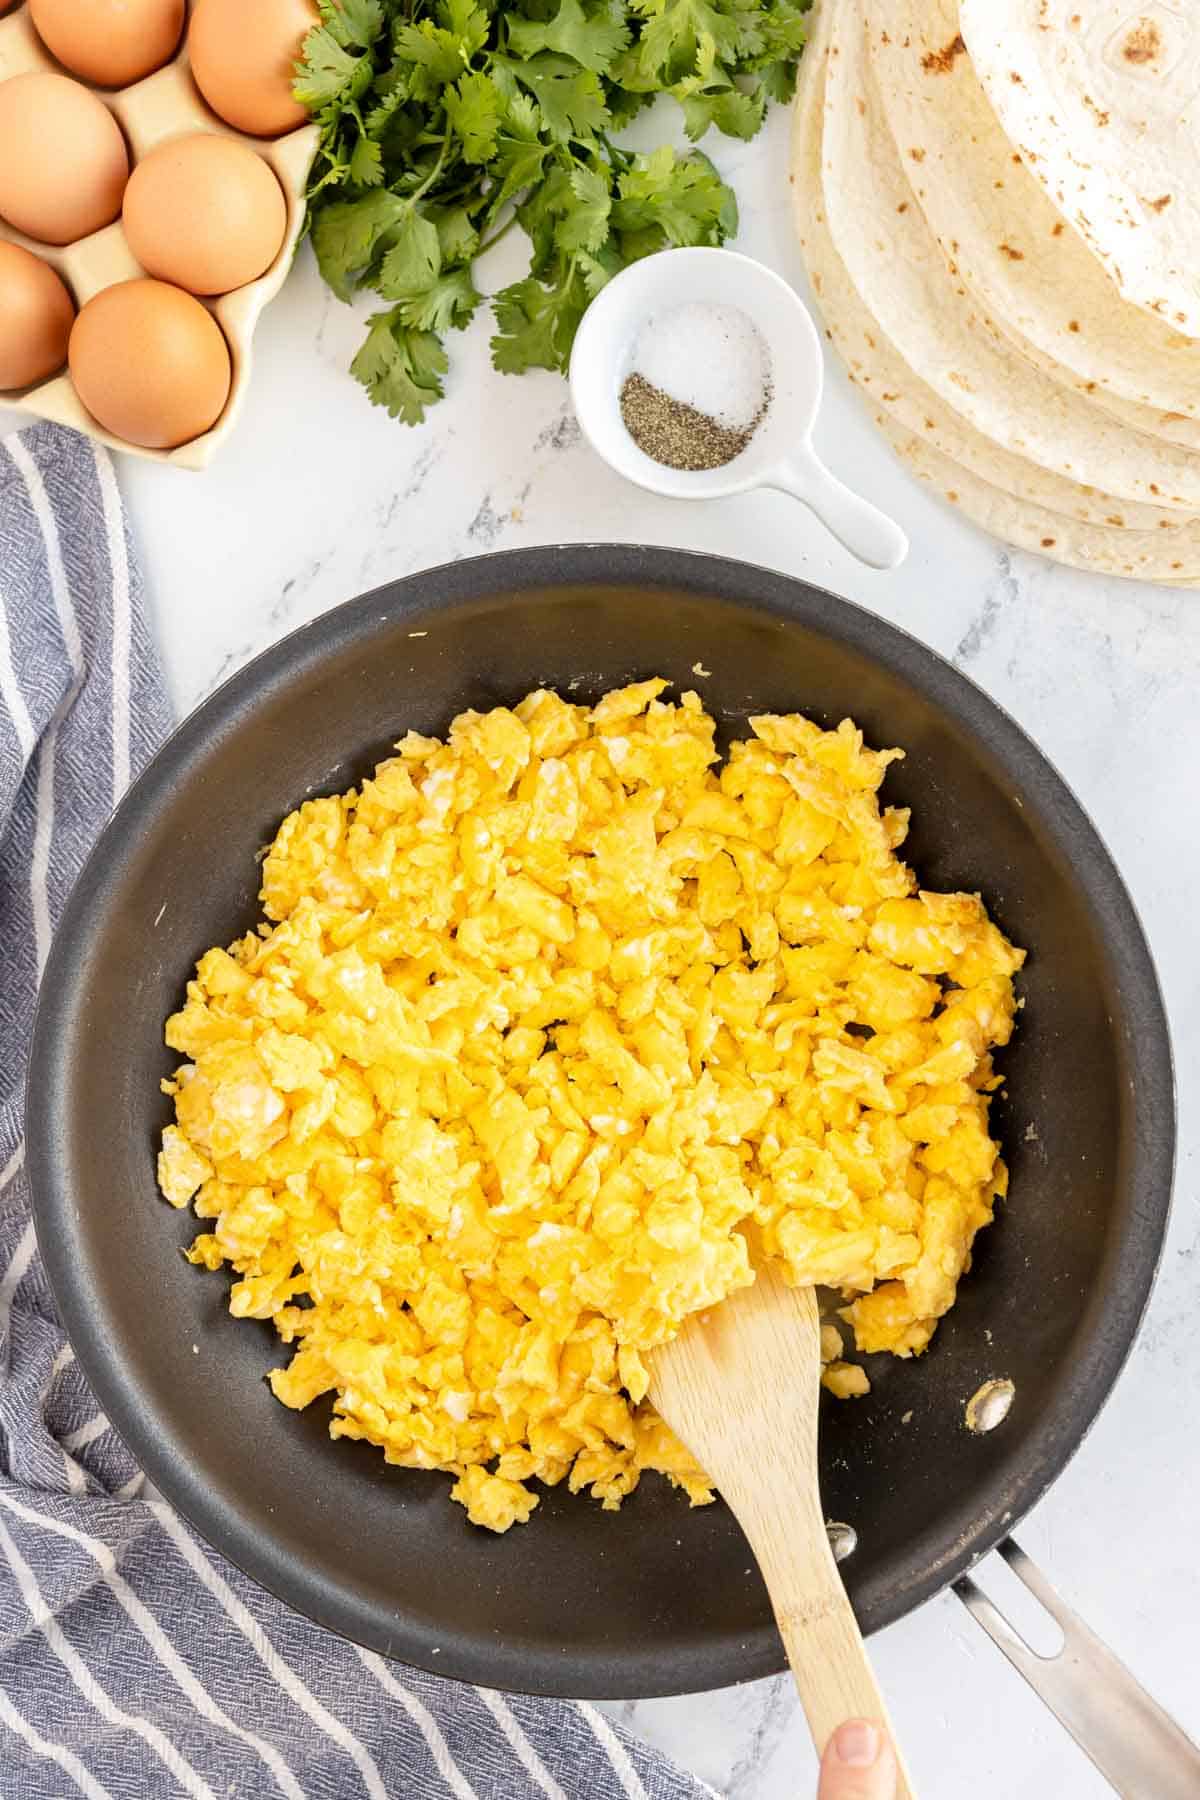 skillet with scrambled eggs and a wooden spoon.